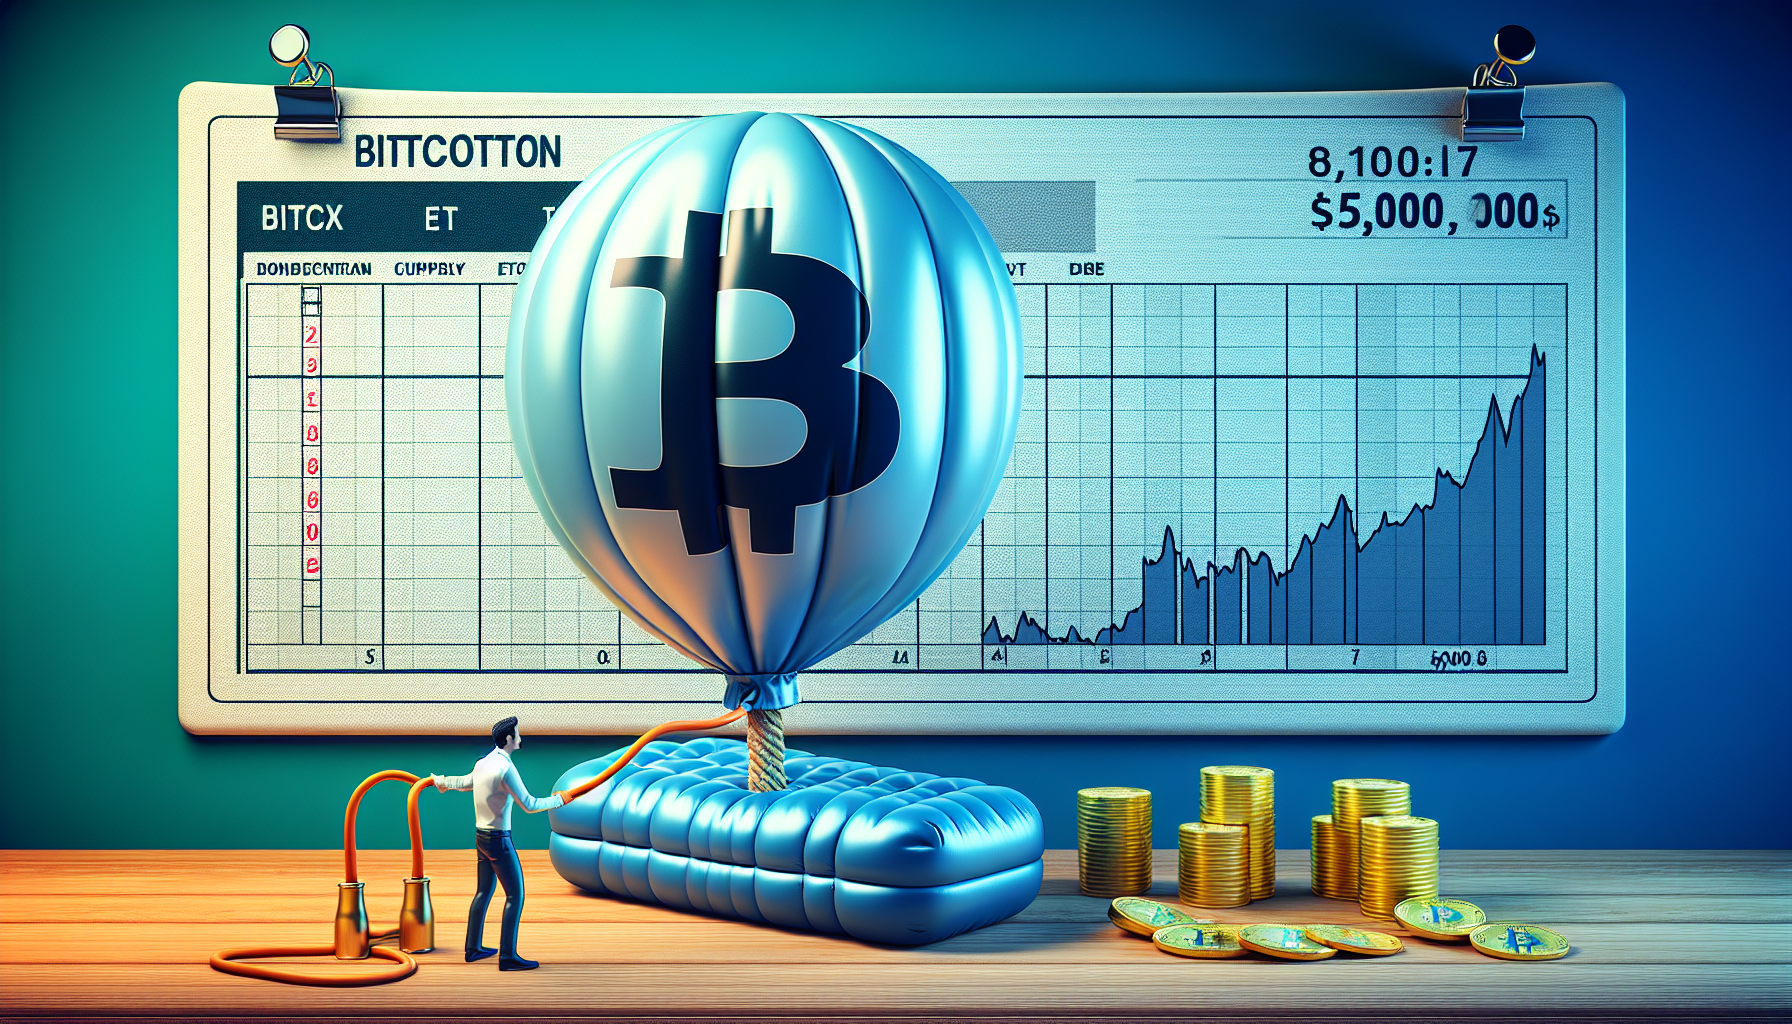 Bitcoin Price Prediction: Is a Quick Pump to $50,000 Imminent as ETF Approval Date Nears?